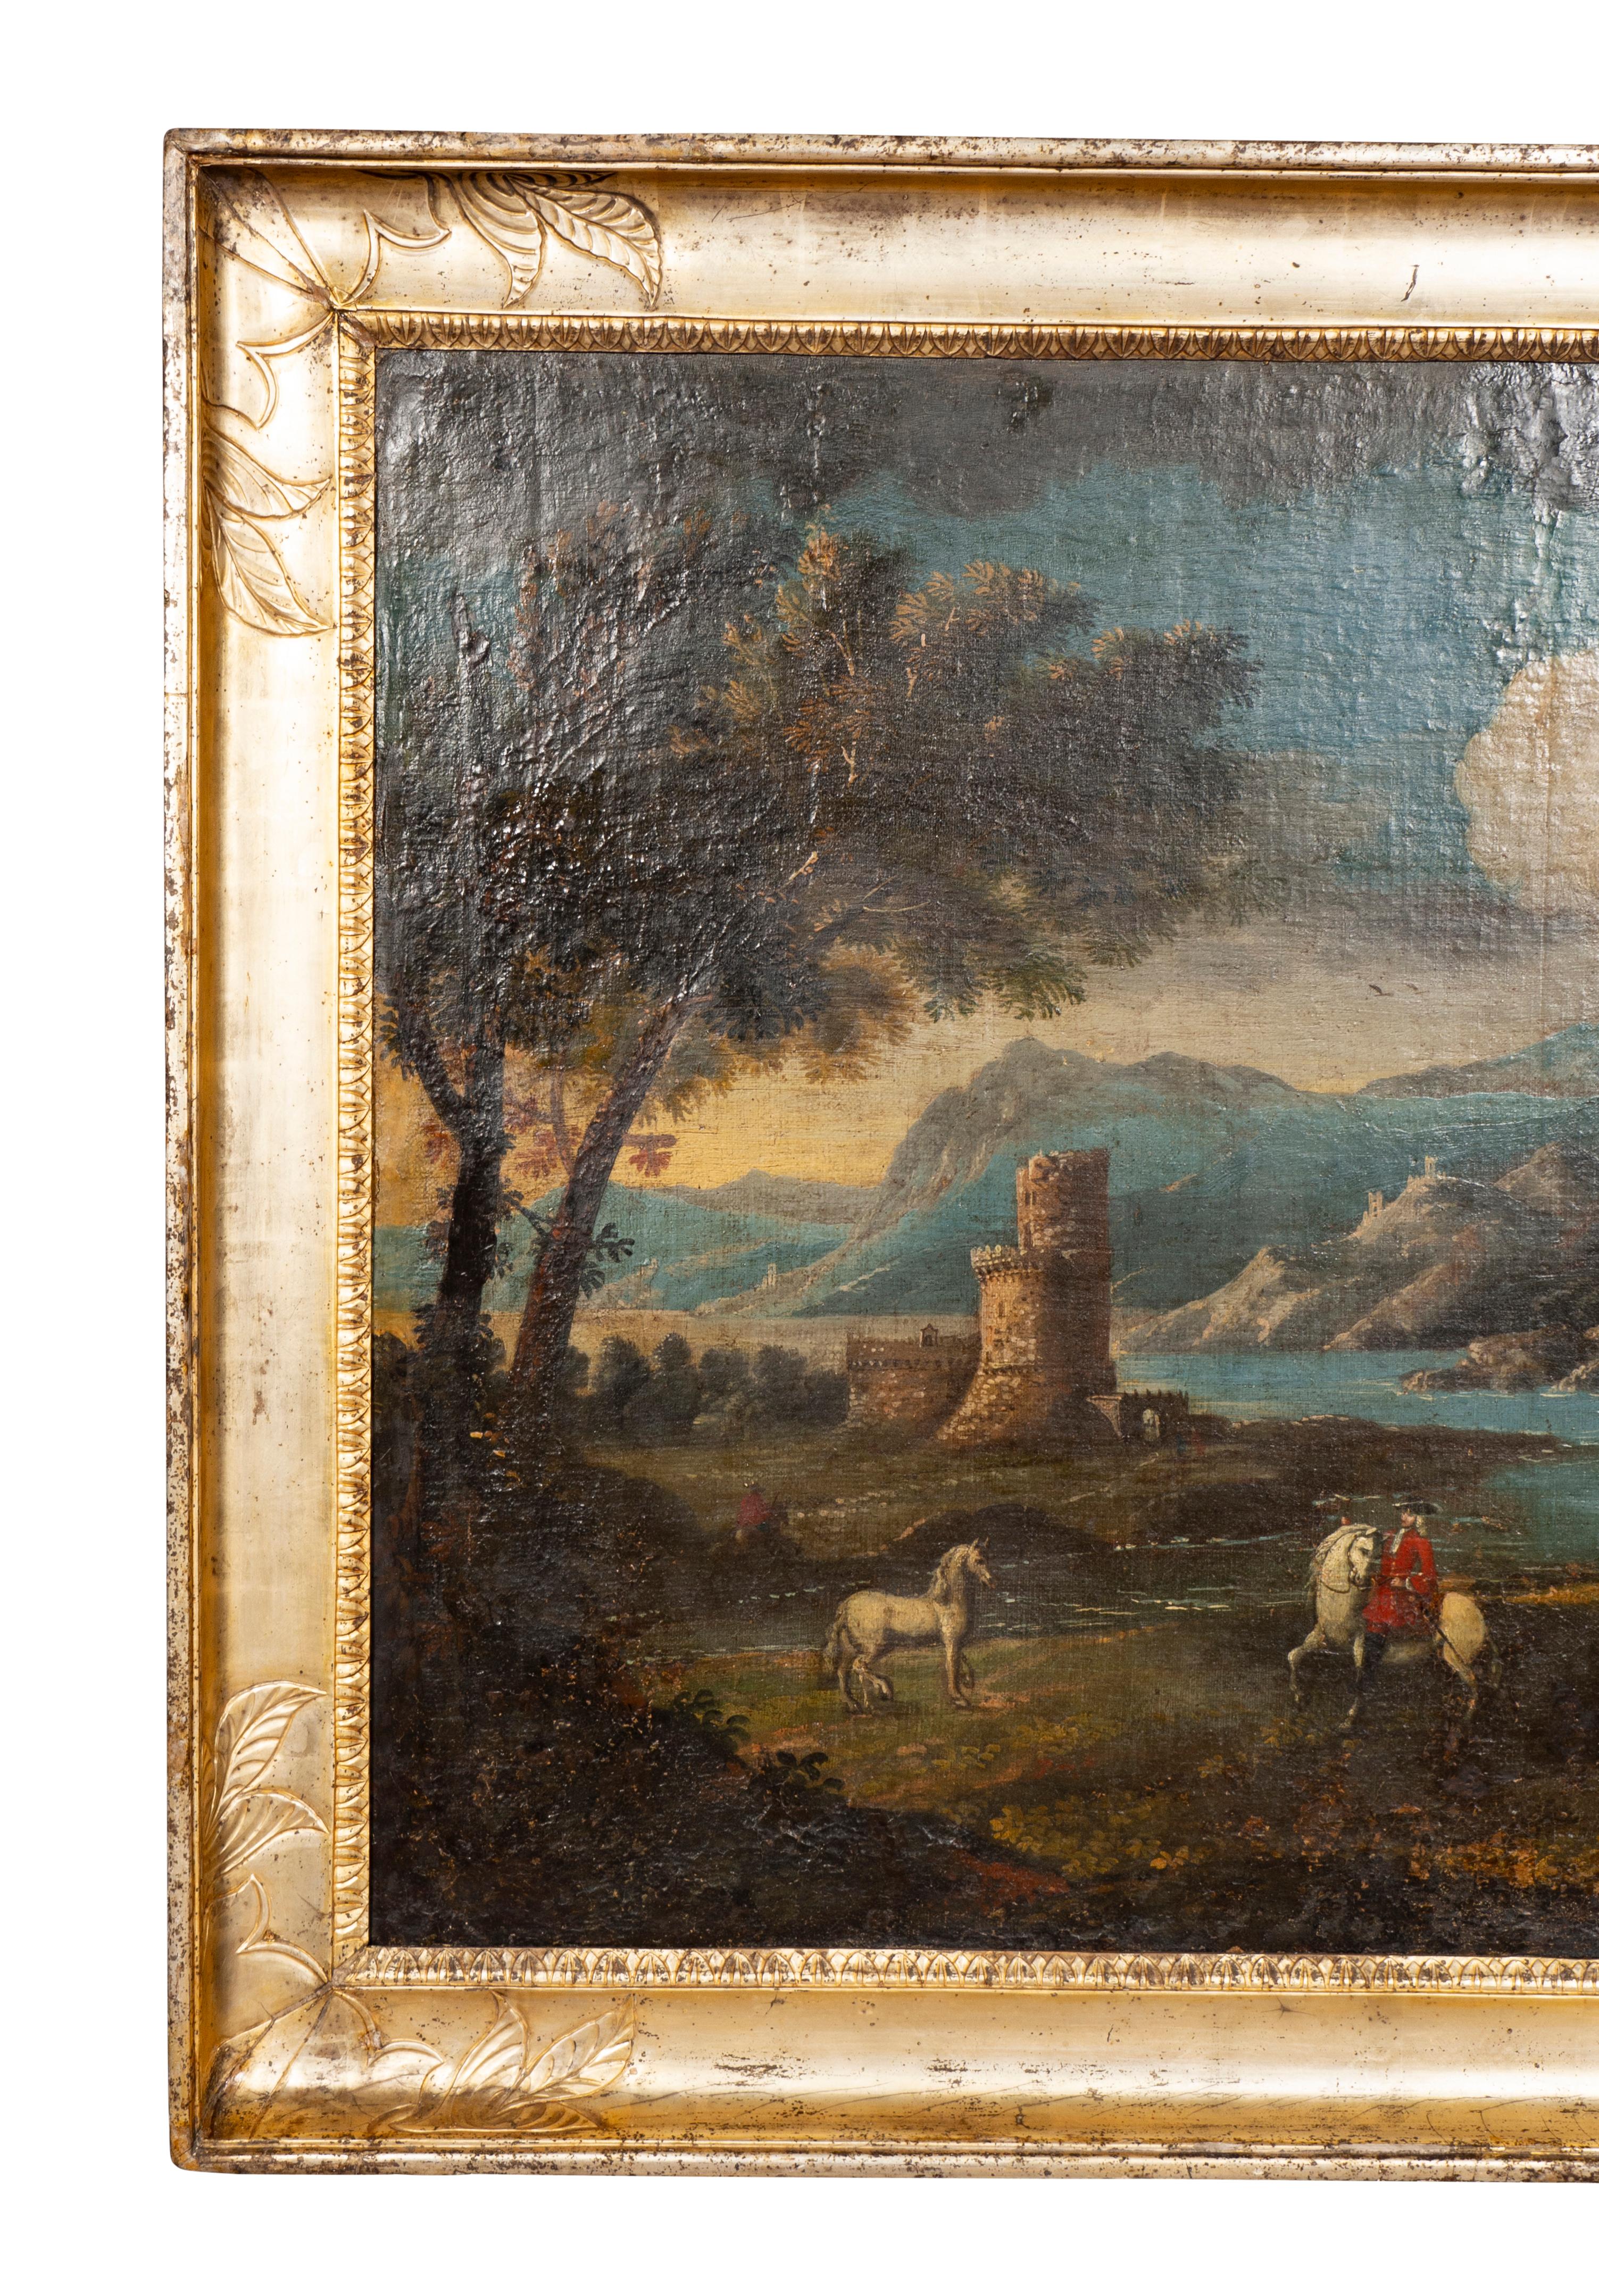 The oil on canvas depicting an ocean bay with castle ruin and man on horseback with red jacket. Farm animals and waterfall. Estate of William Hodgins. Boston Mass. Silver leaf carved wood frame.